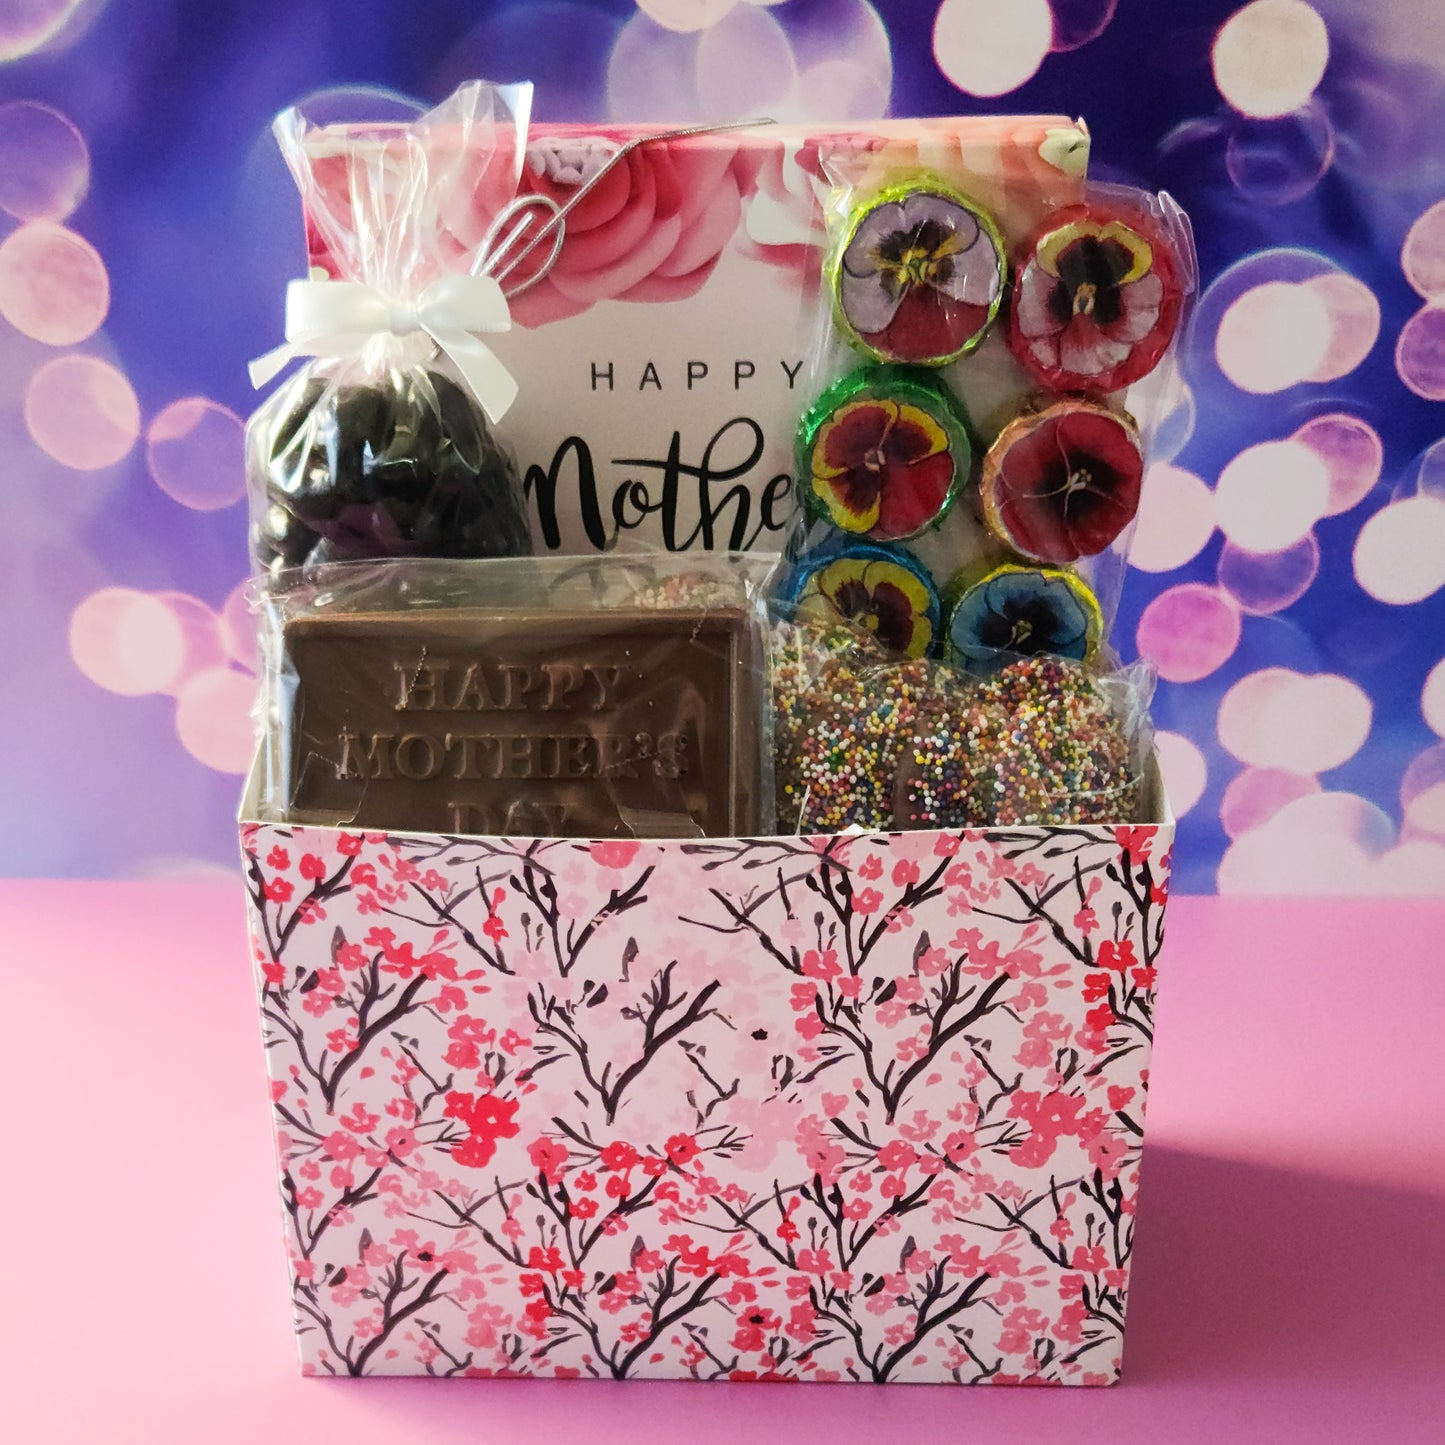 A gift basket themed for mom. Filled with dark chocolate cranberries, milk chocolate nonpareils, flowers and a chocolate Mothers day card along with a 16 piece chocolate assortment.